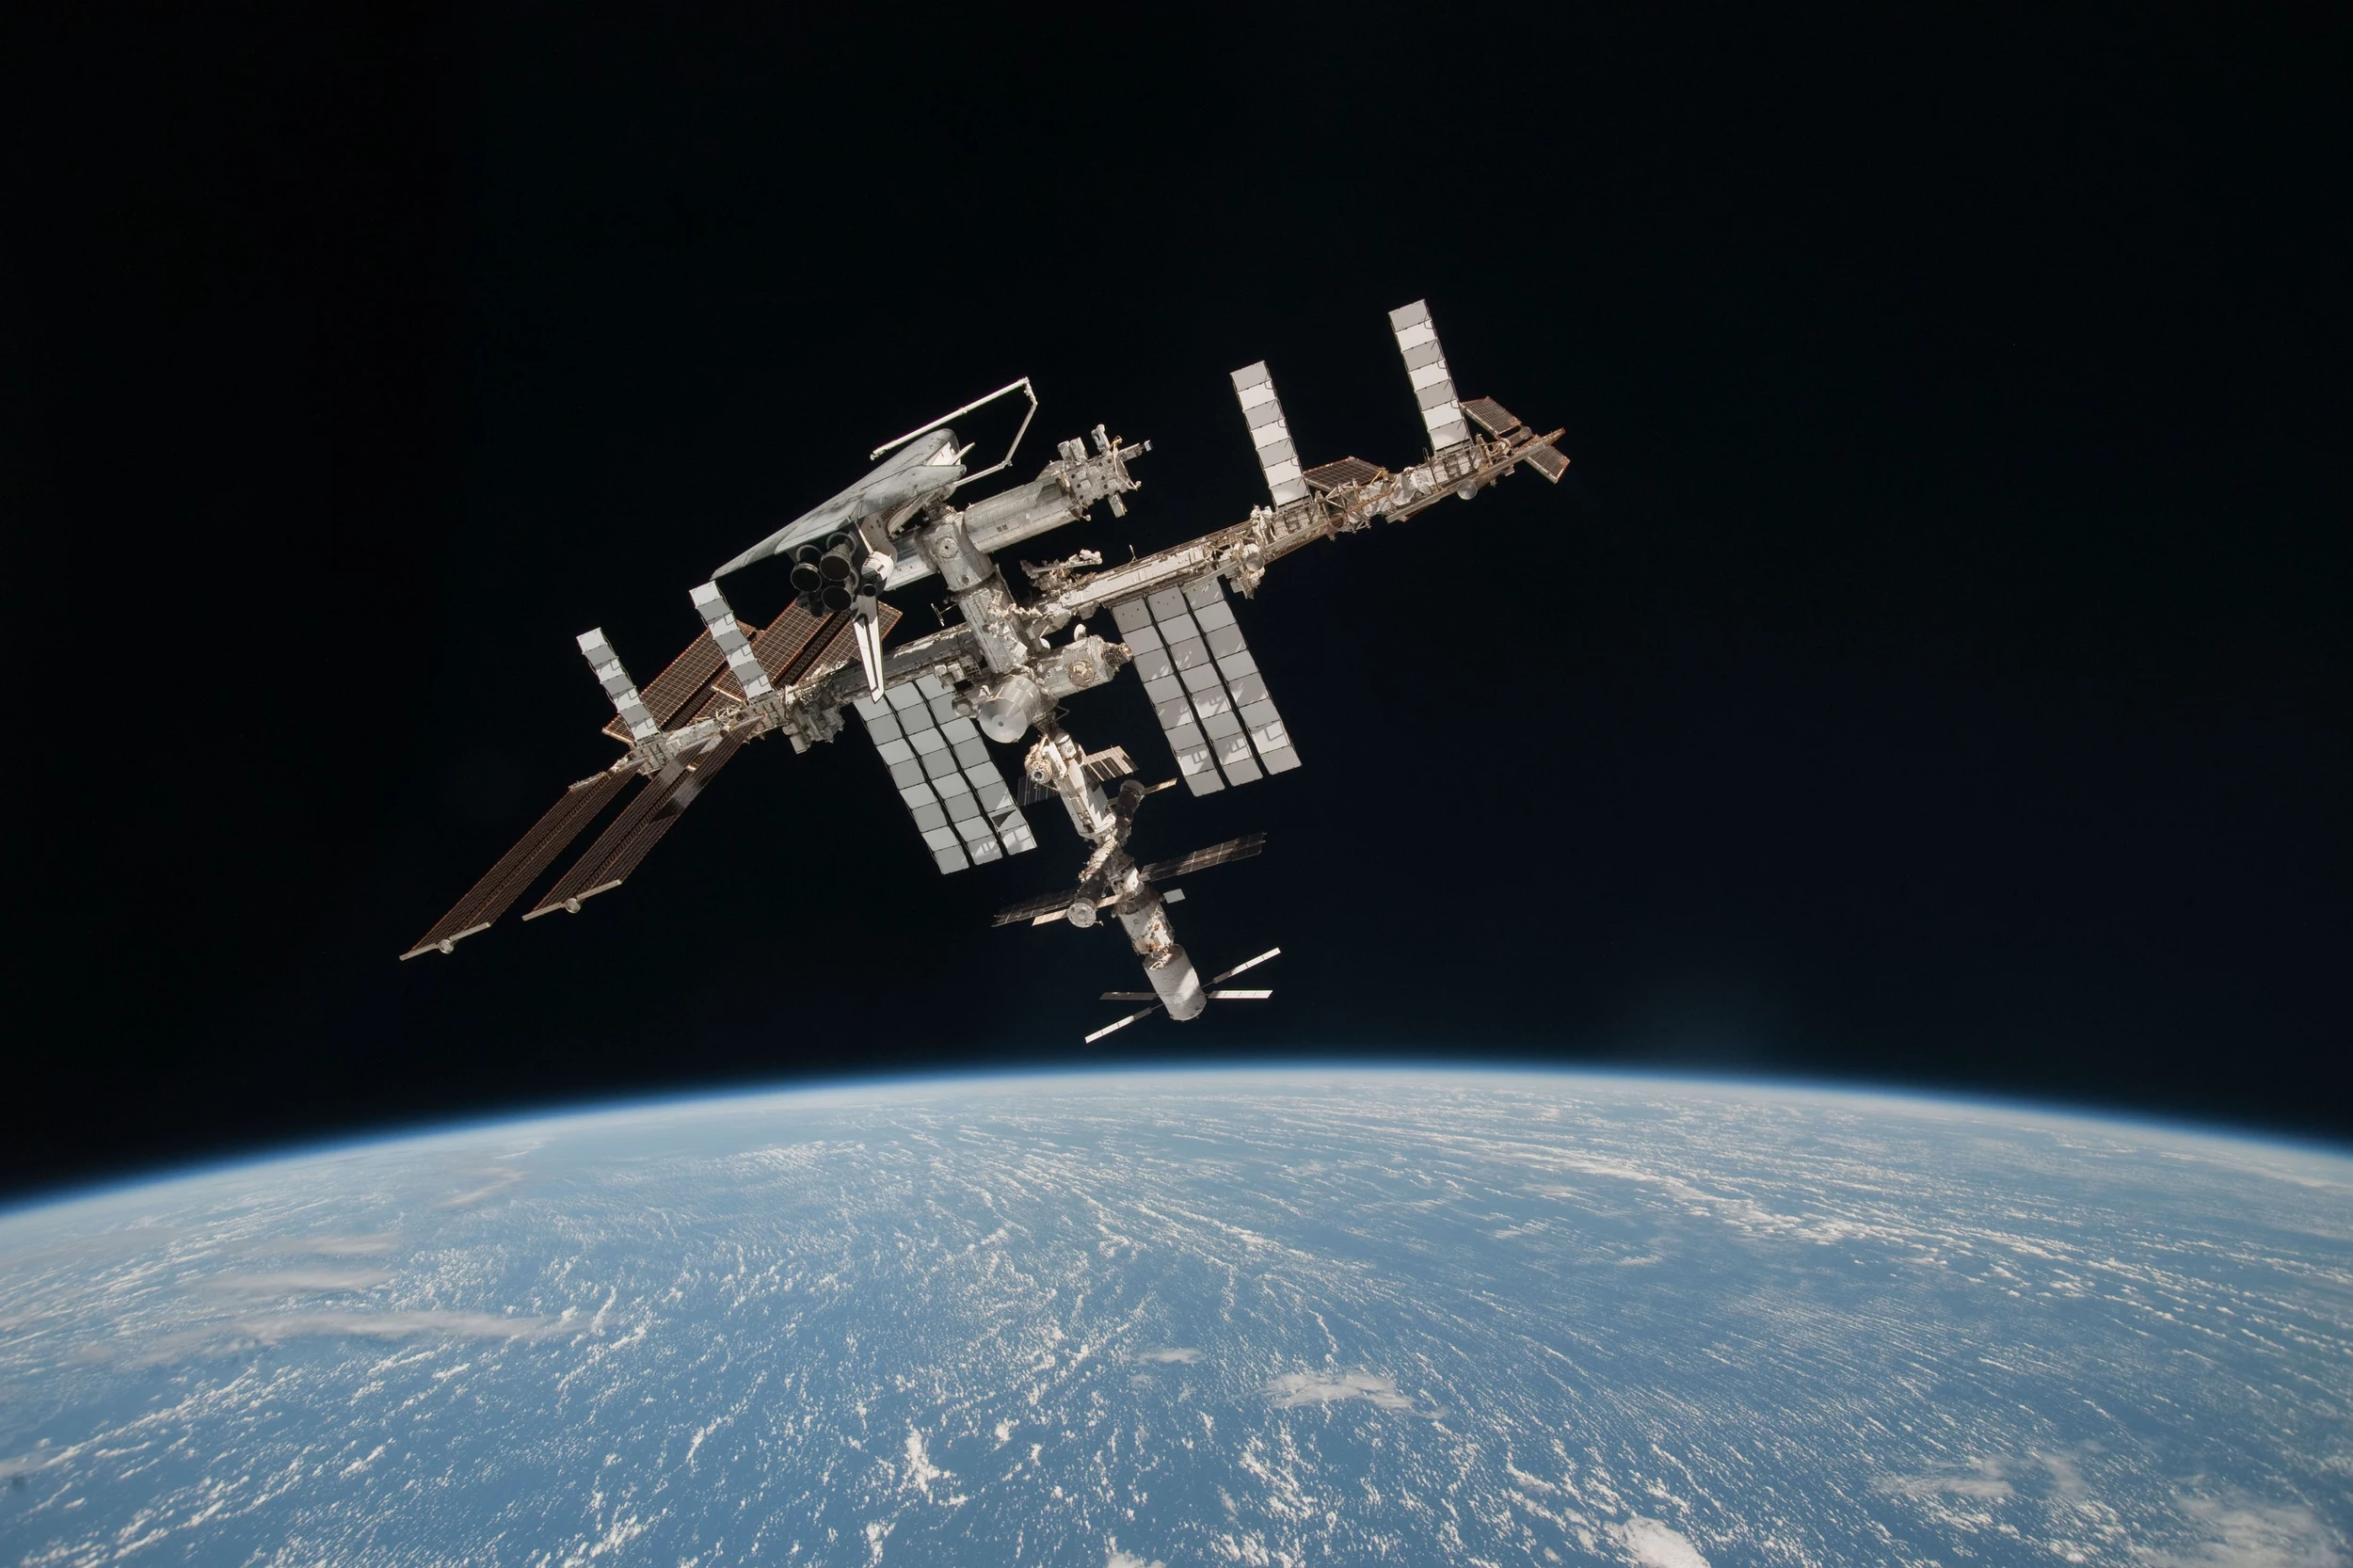 international space station visible